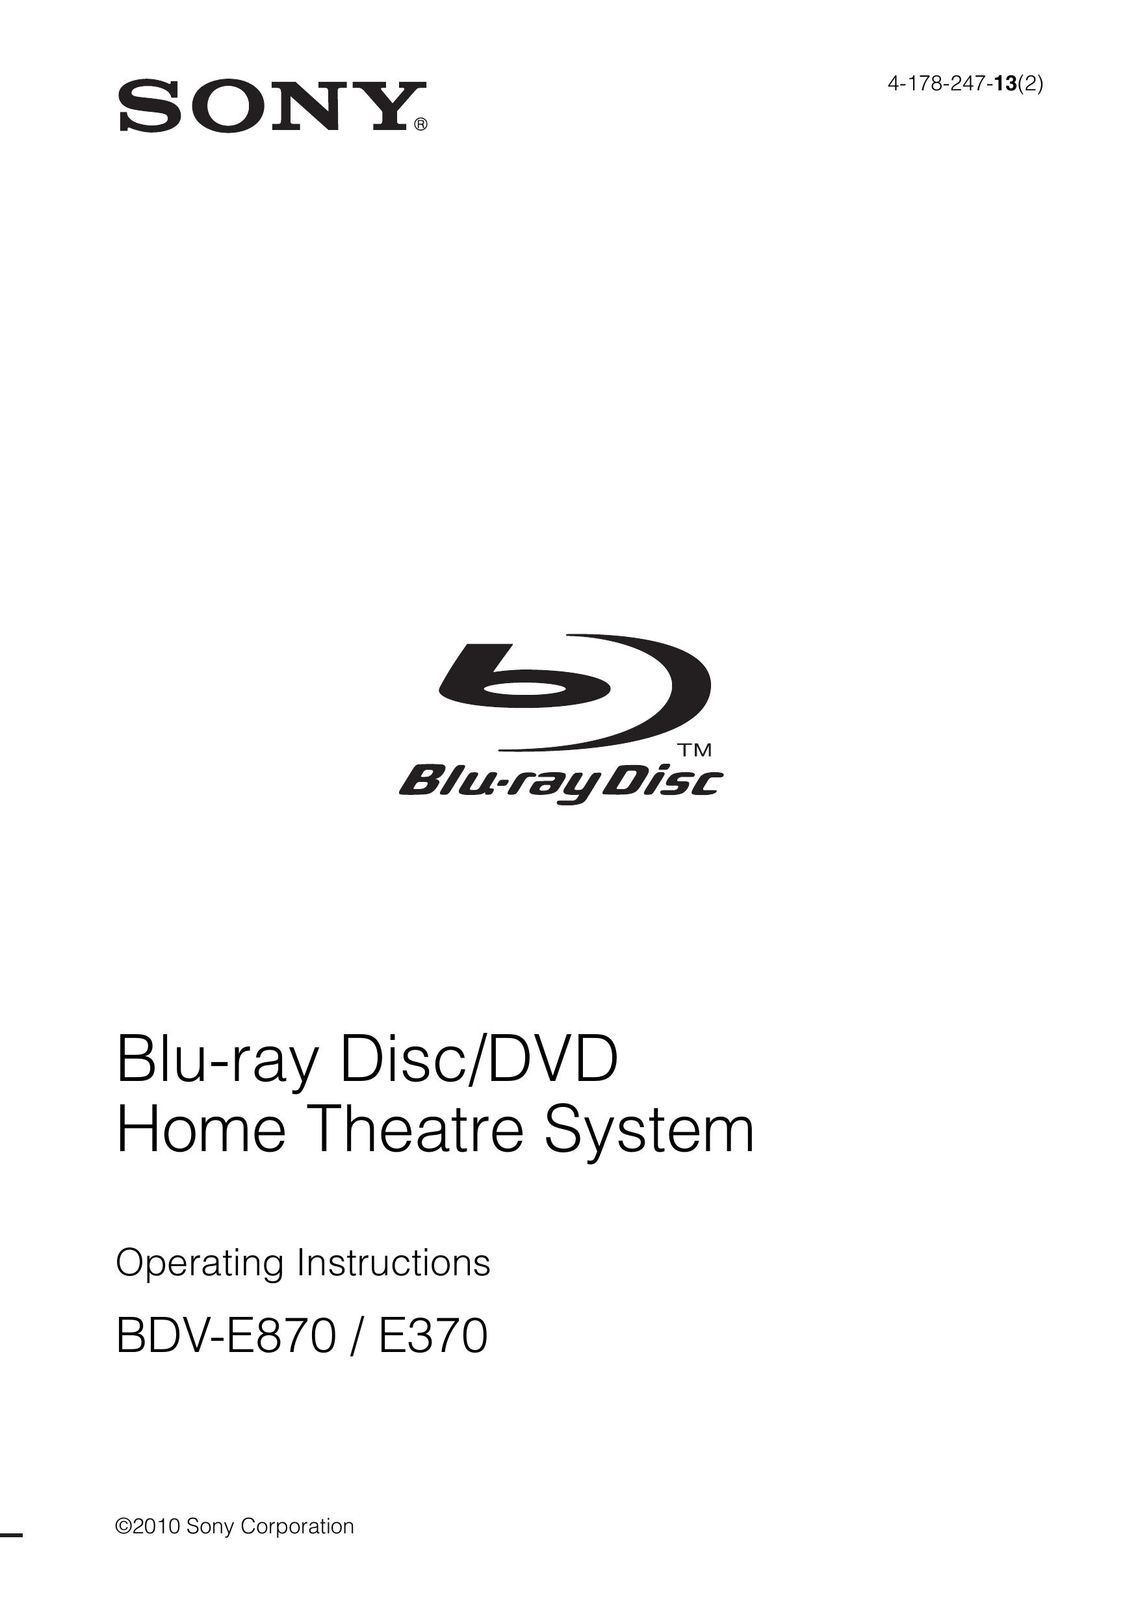 Sony 4-178-247-13(2) Home Theater System User Manual